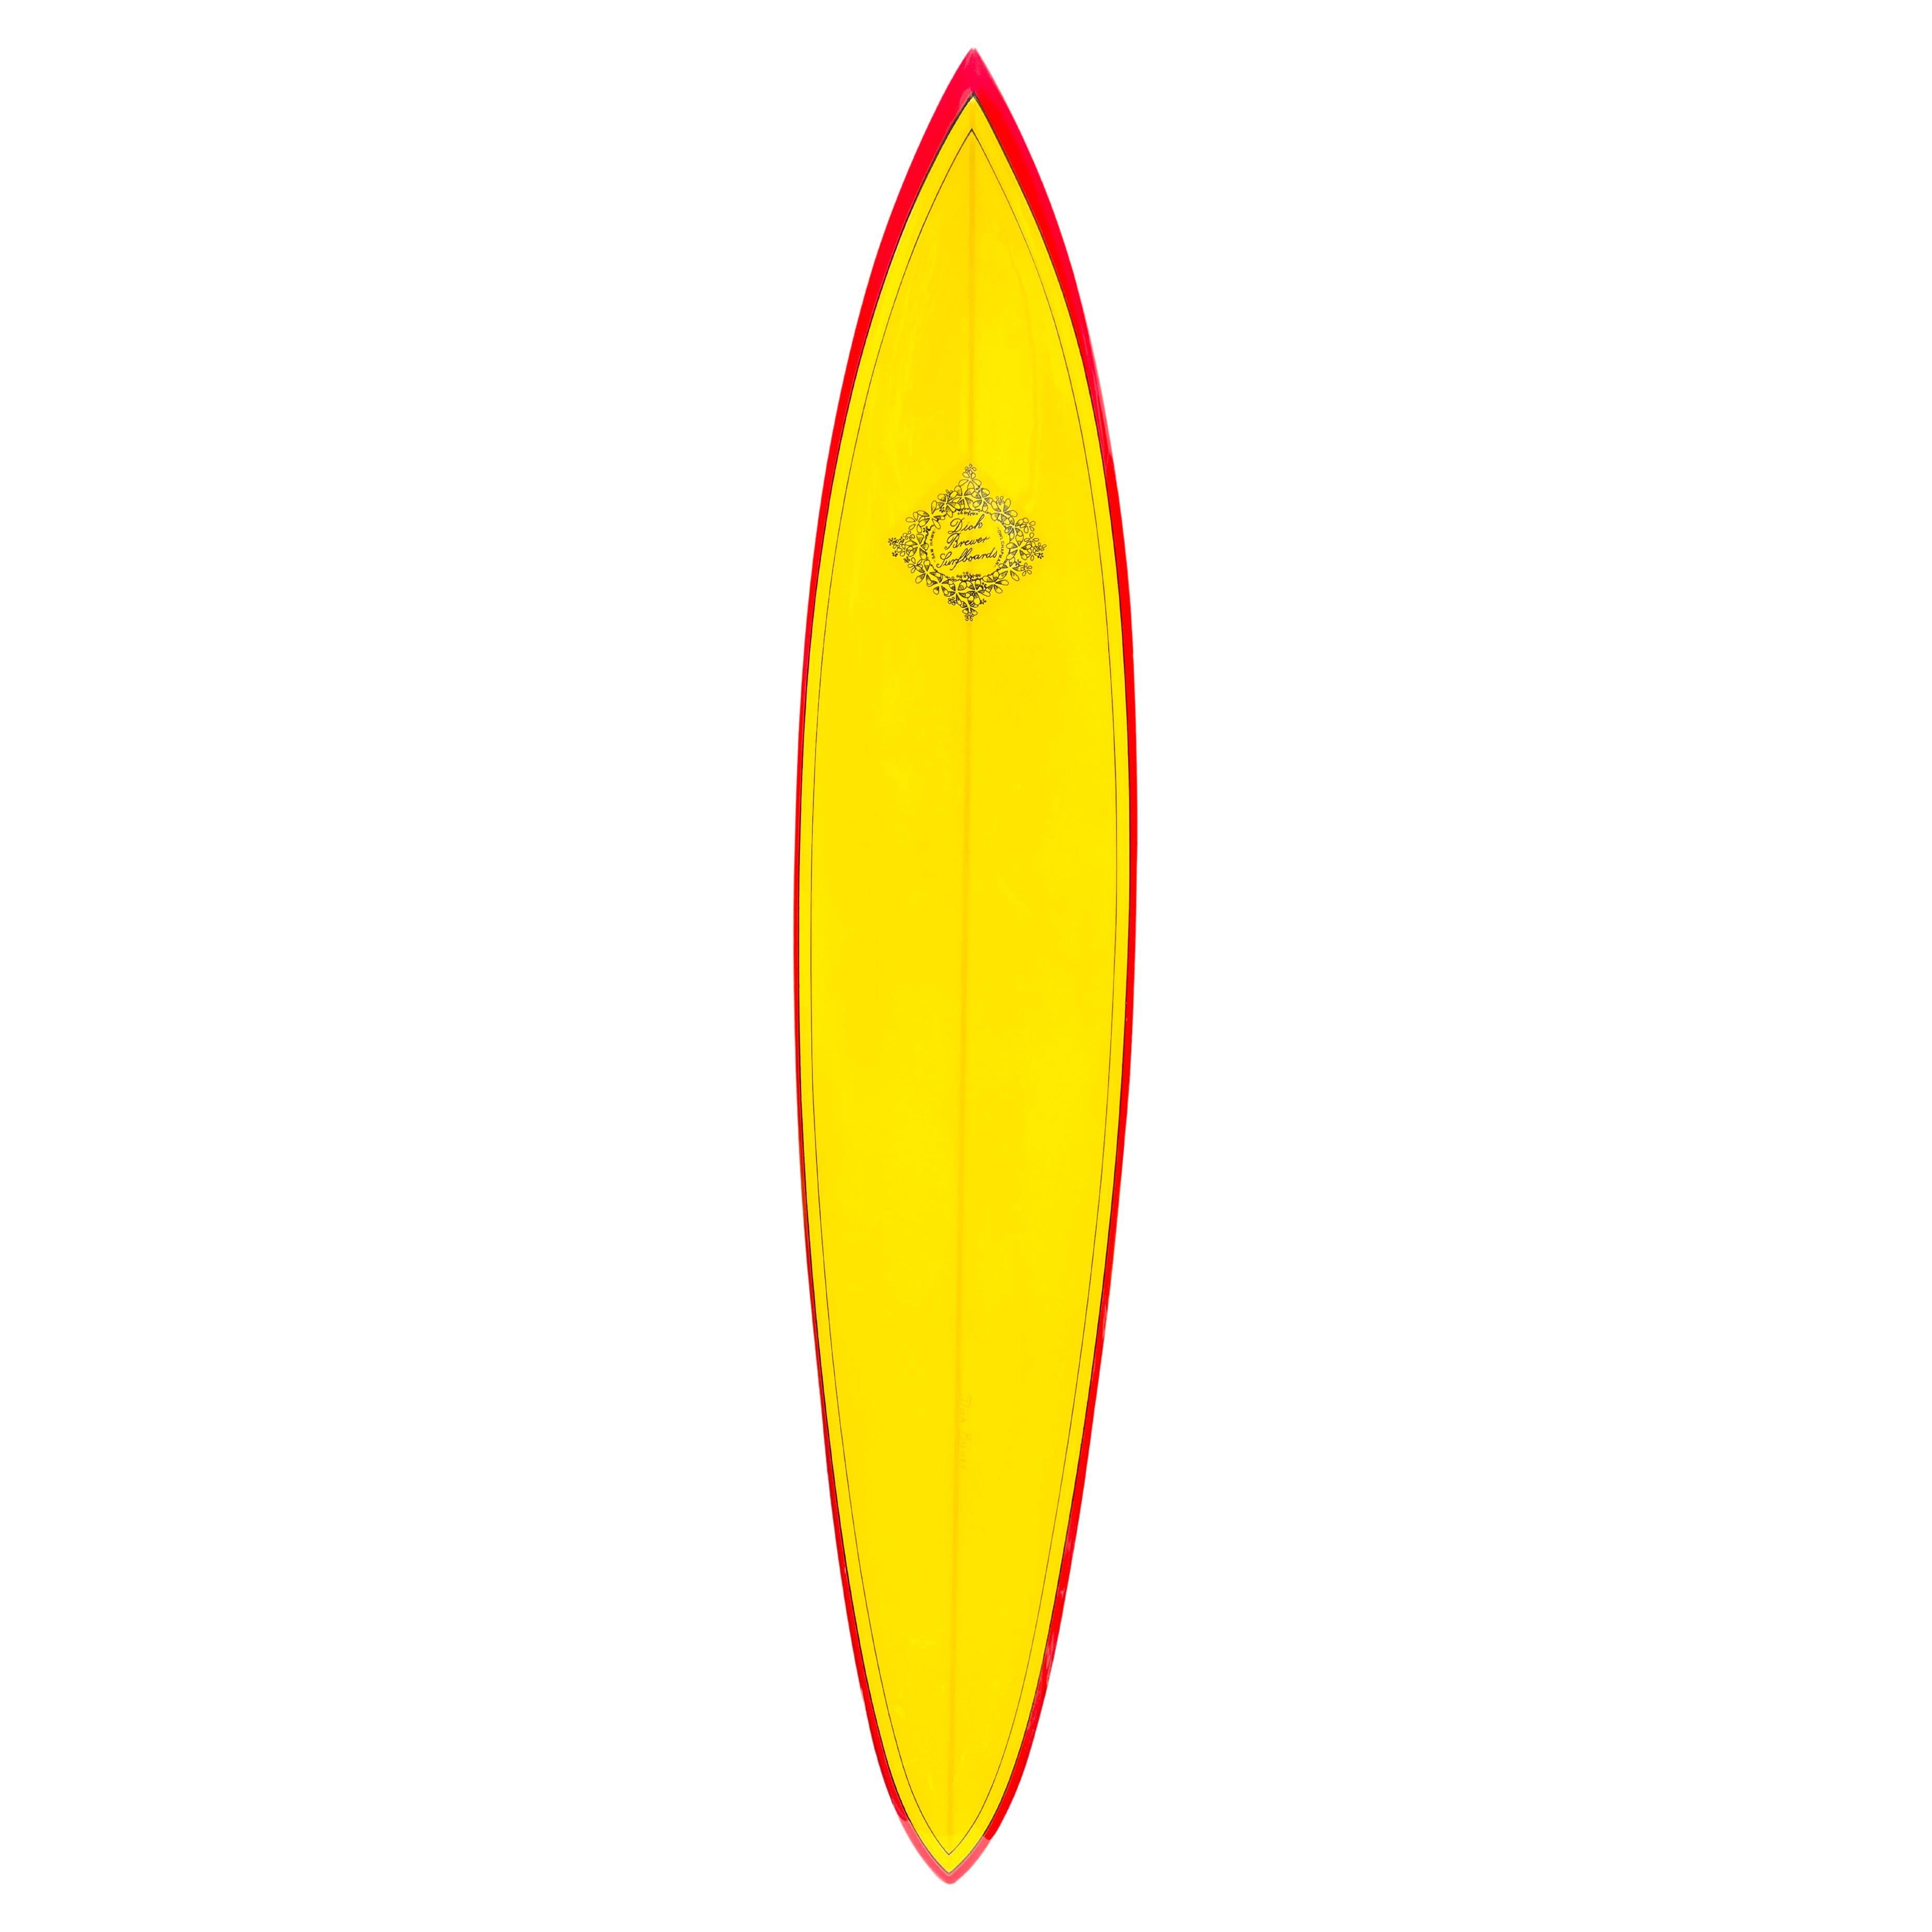 1968 Replica Lahaina Clinton Blears model surfboard by Dick Brewer